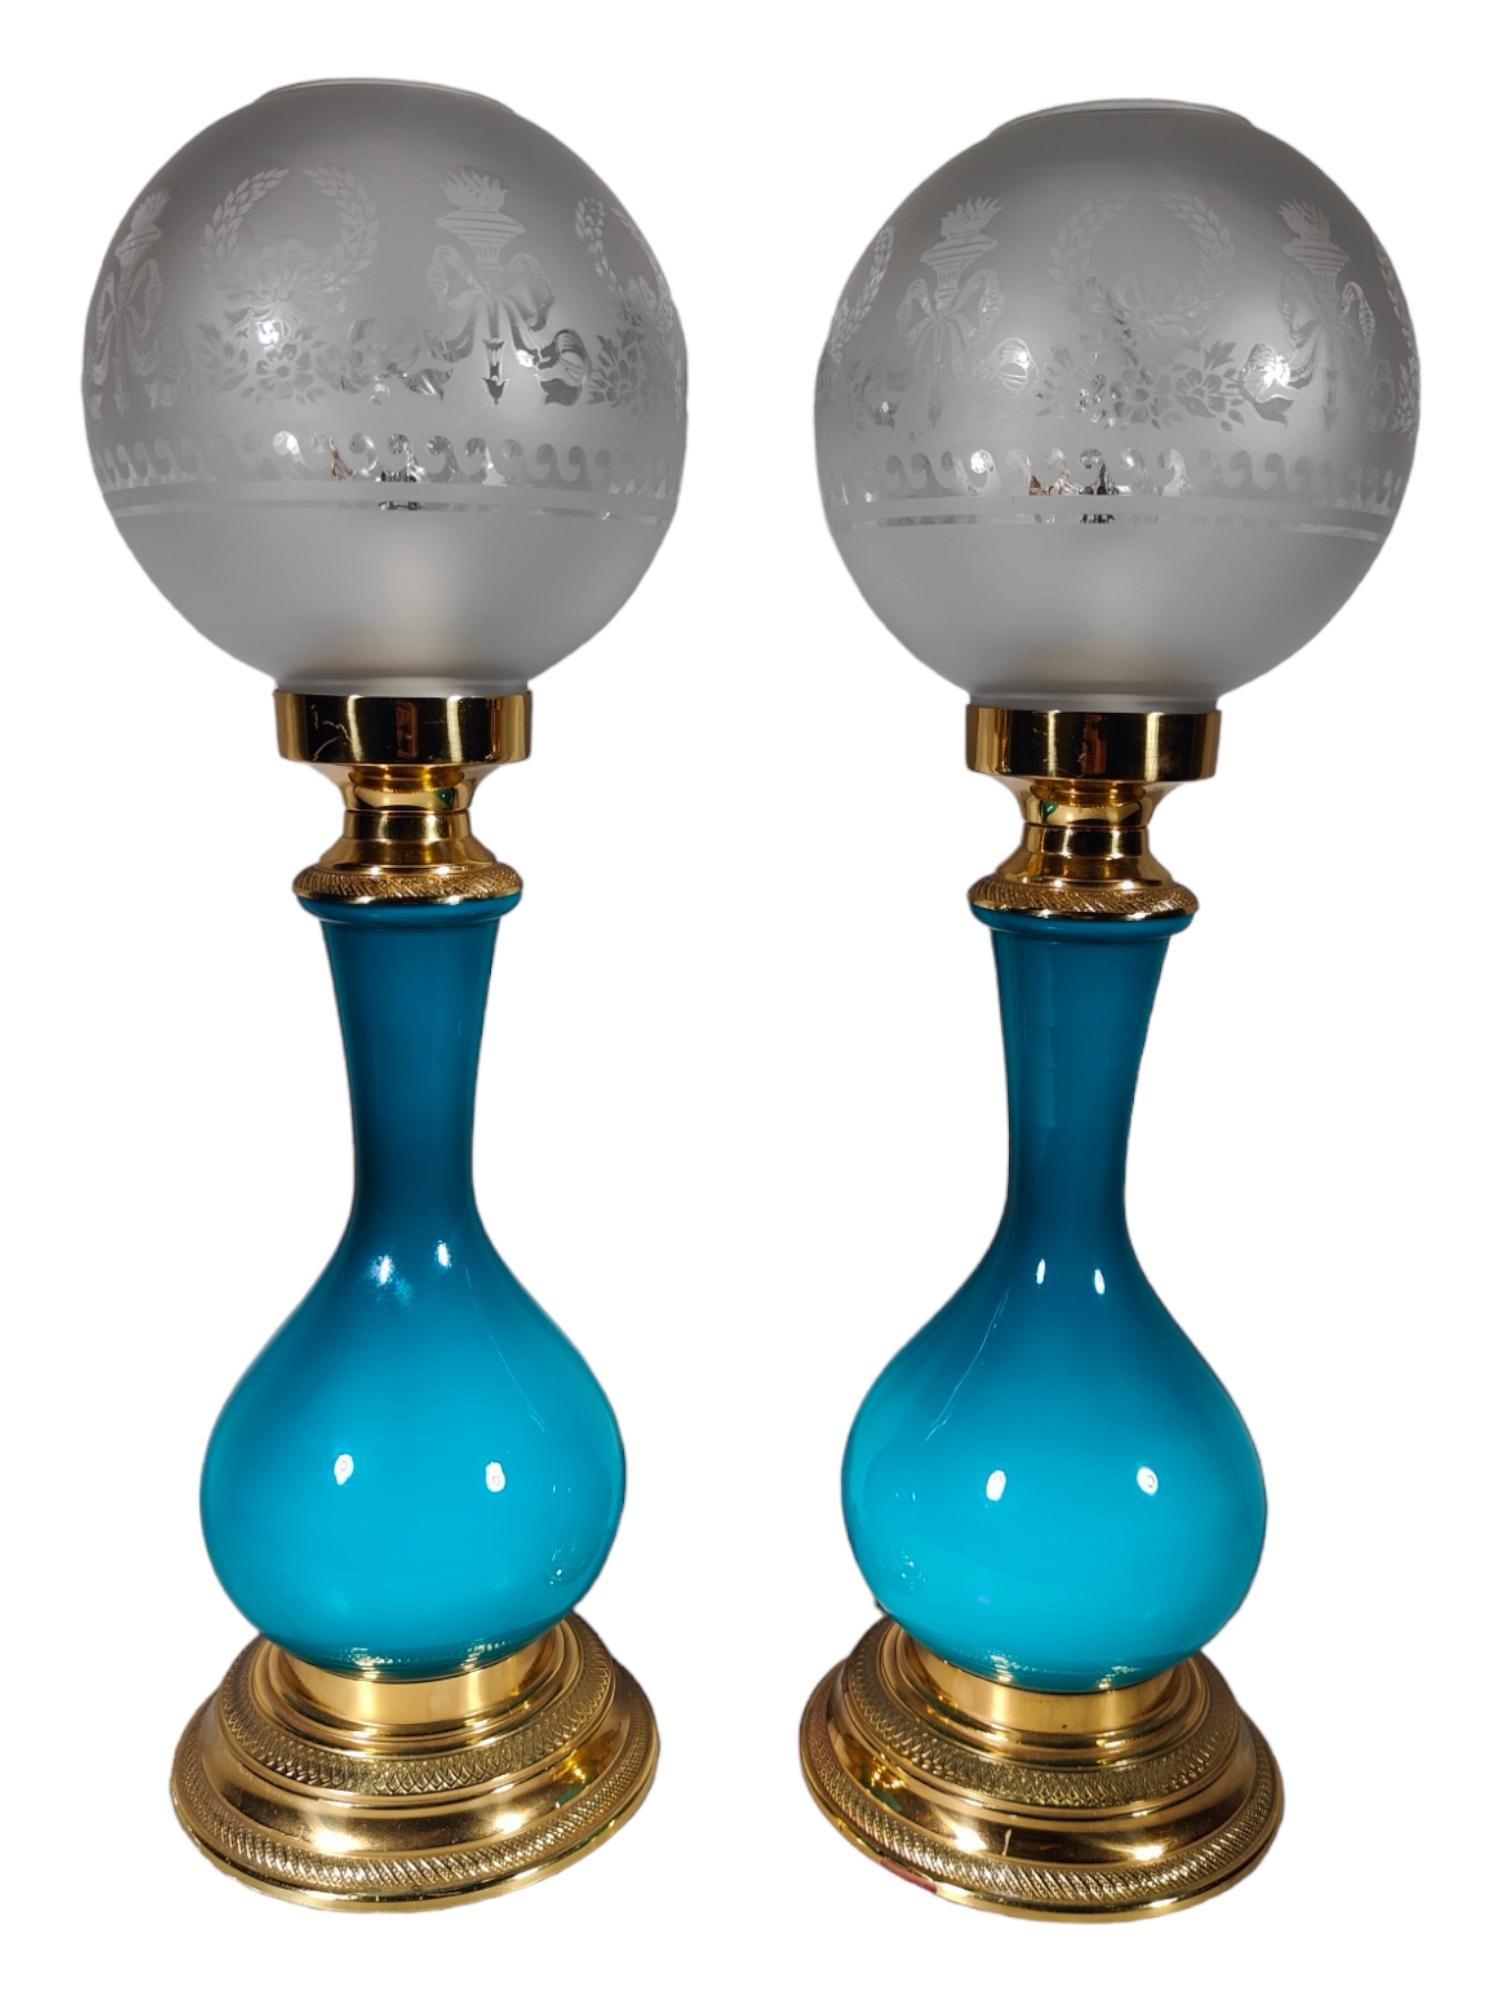 Decorative lamps from the early 1900 in blue glass and golden bronze measurements: 50 cm heigh.